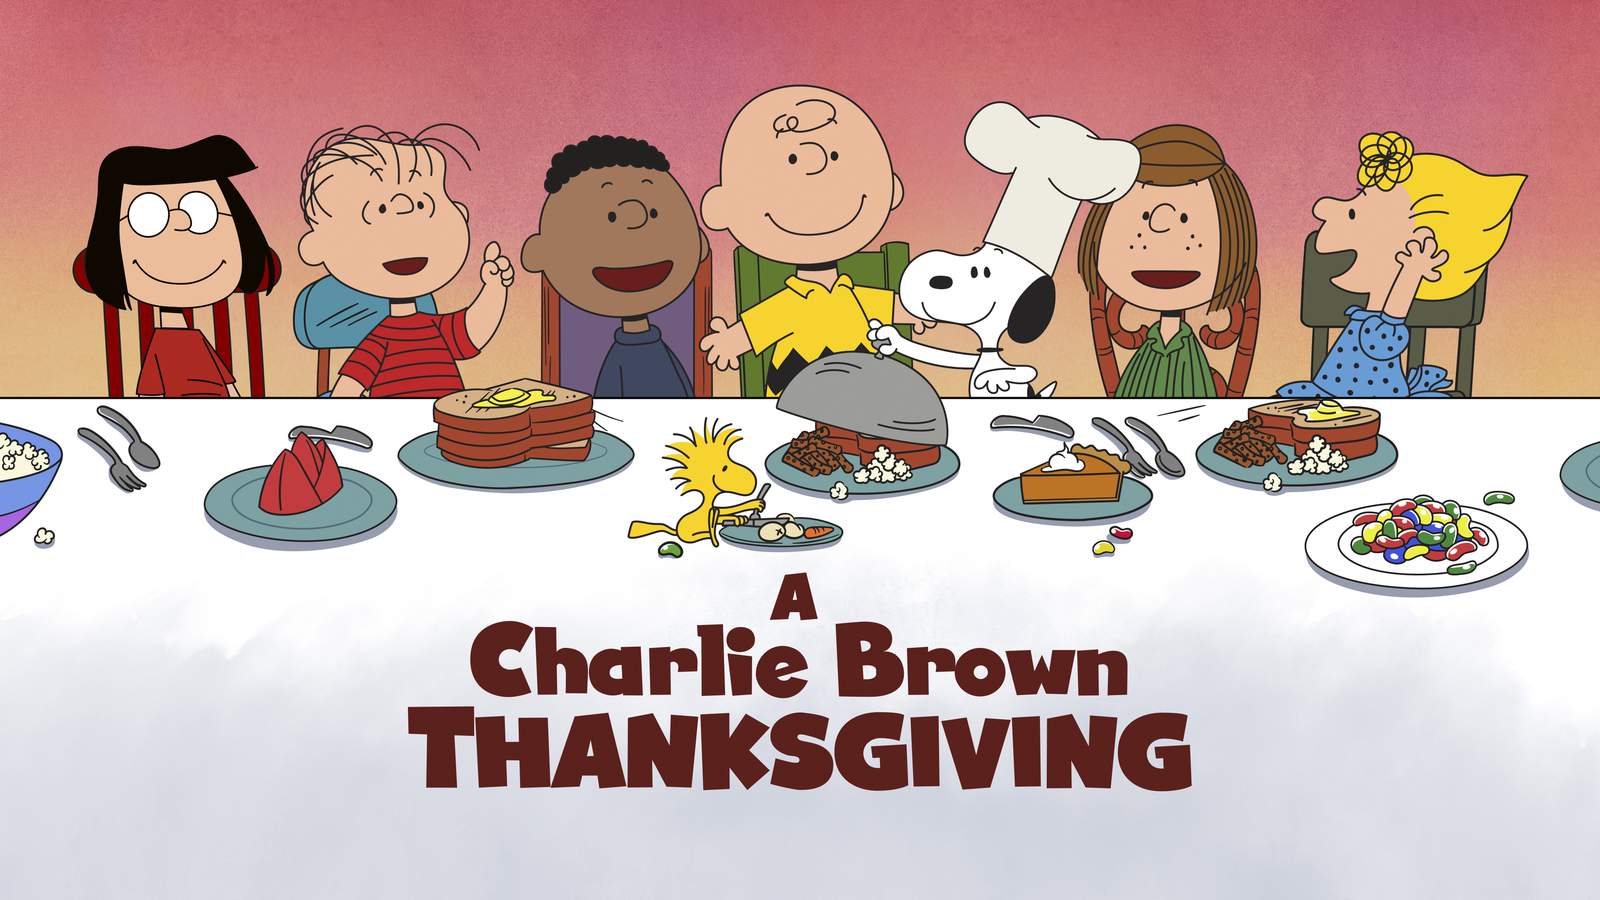 Charlie Brown holiday specials returning to broadcast TV